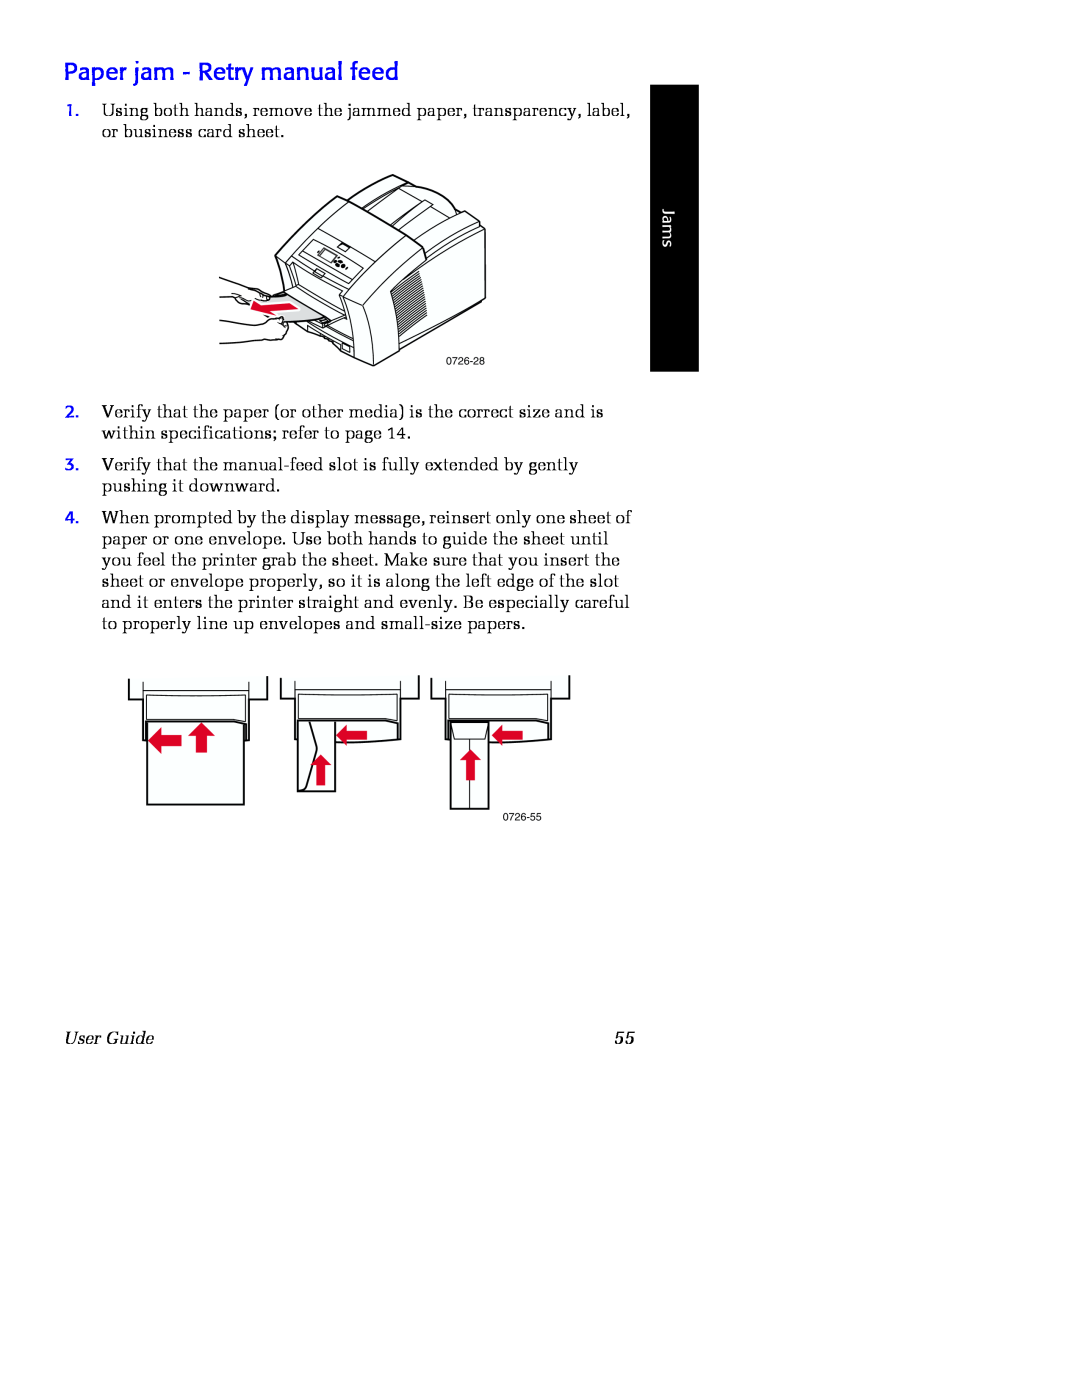 Xerox Phaser 860 Paper jam - Retry manual feed, Jams, User Guide 